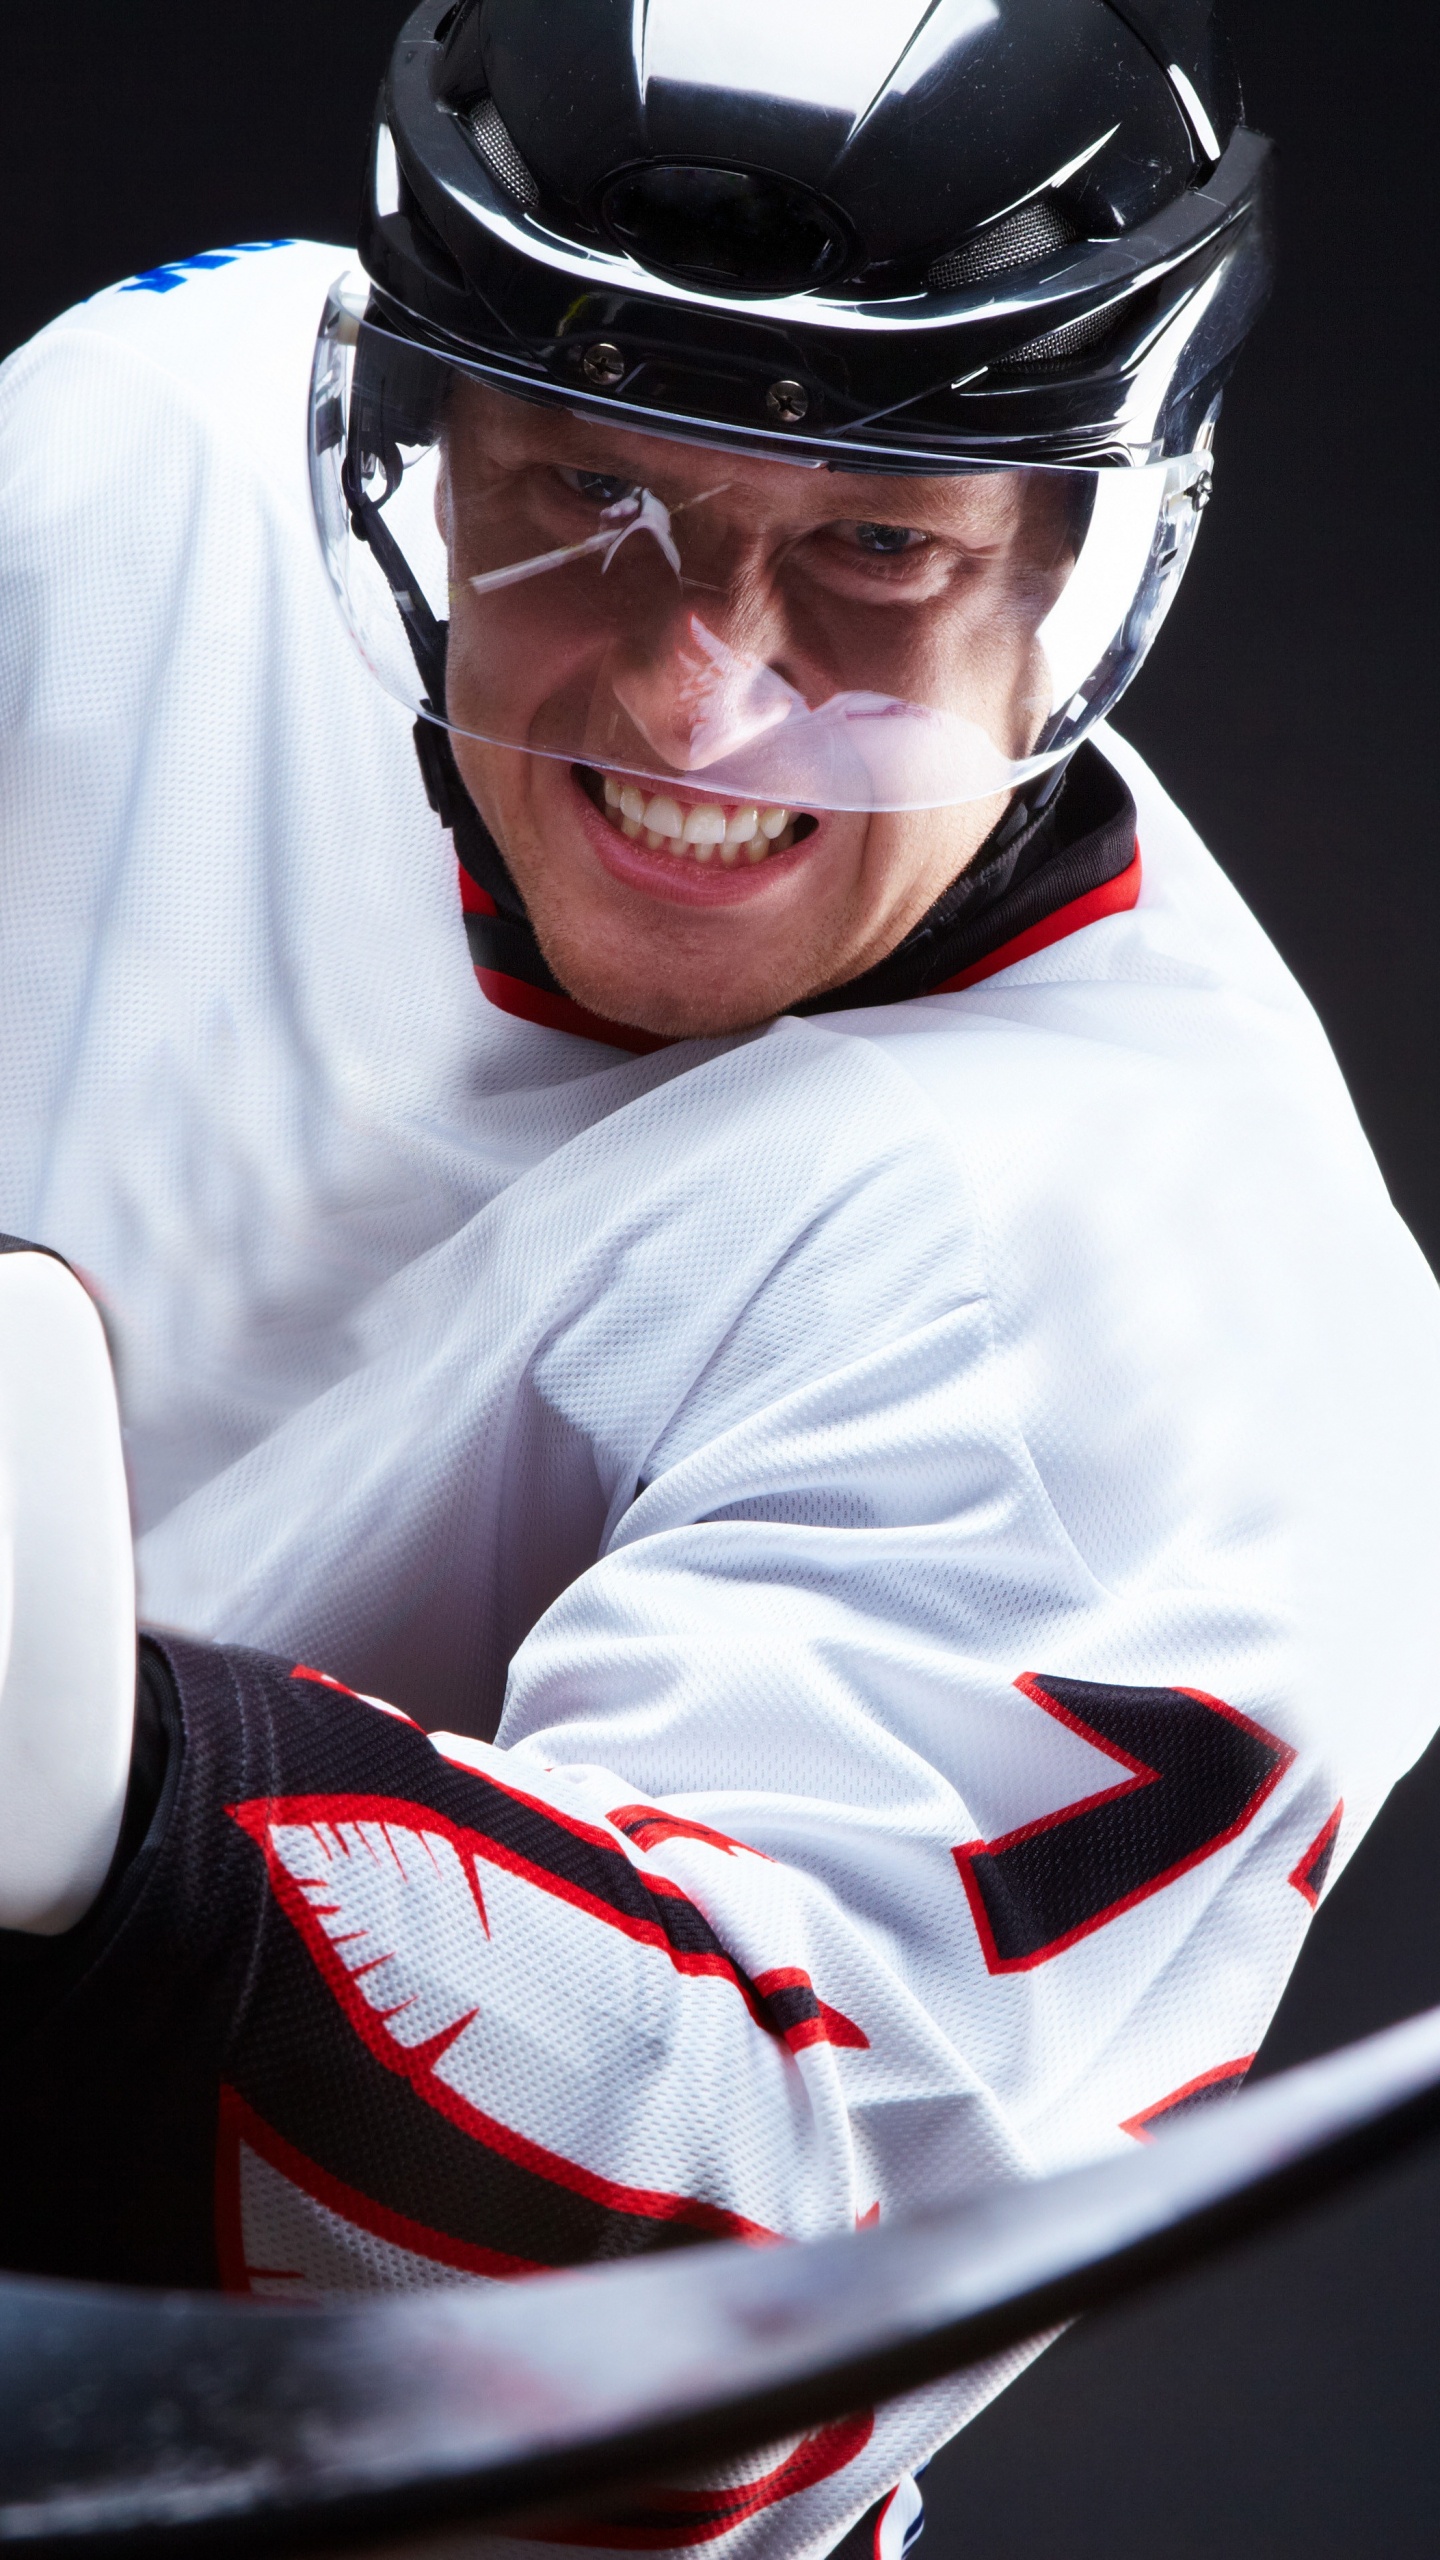 Man in White and Red Long Sleeve Shirt Wearing Black Helmet. Wallpaper in 1440x2560 Resolution